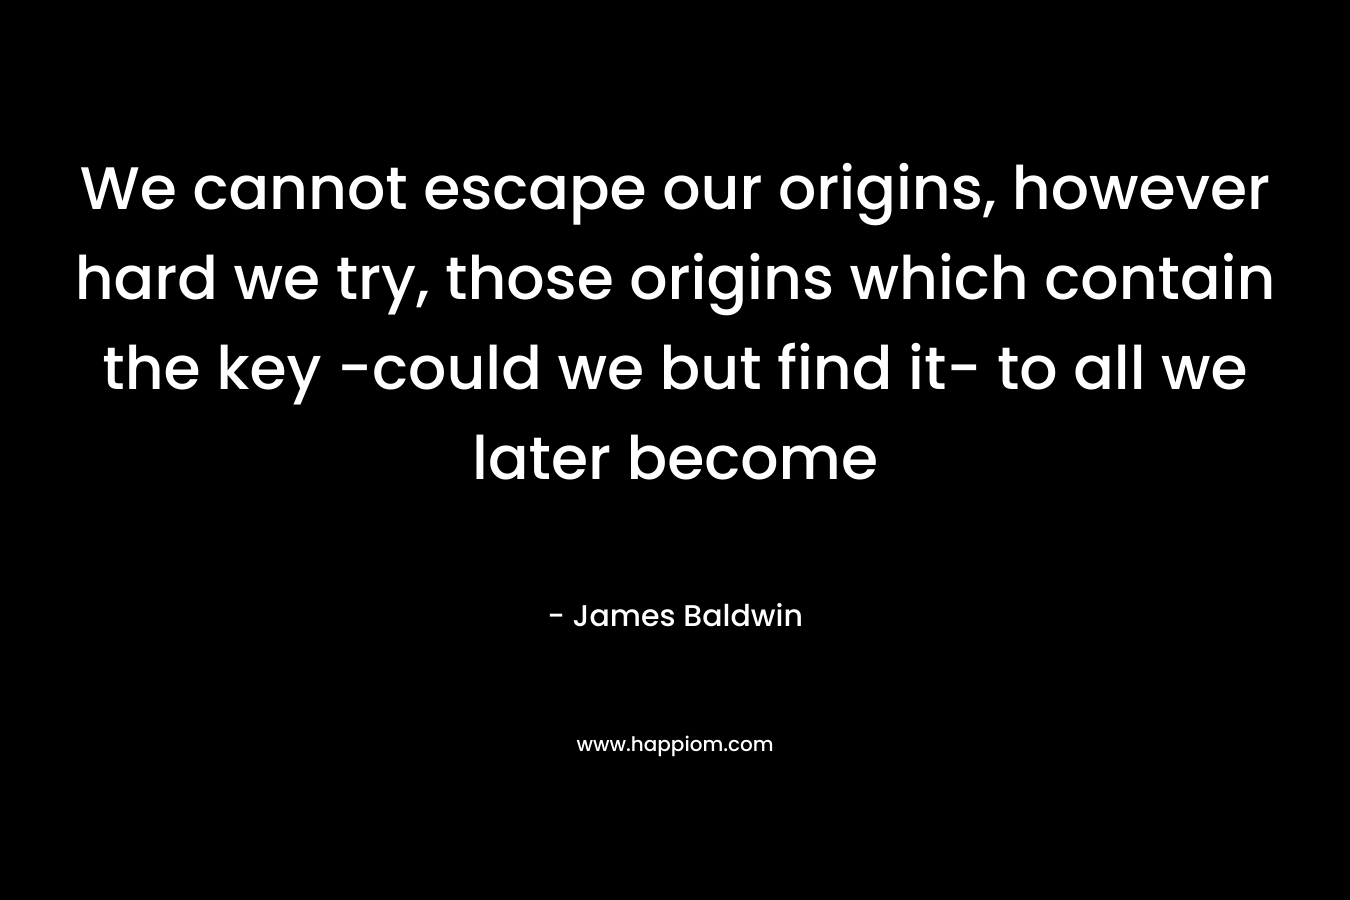 We cannot escape our origins, however hard we try, those origins which contain the key -could we but find it- to all we later become